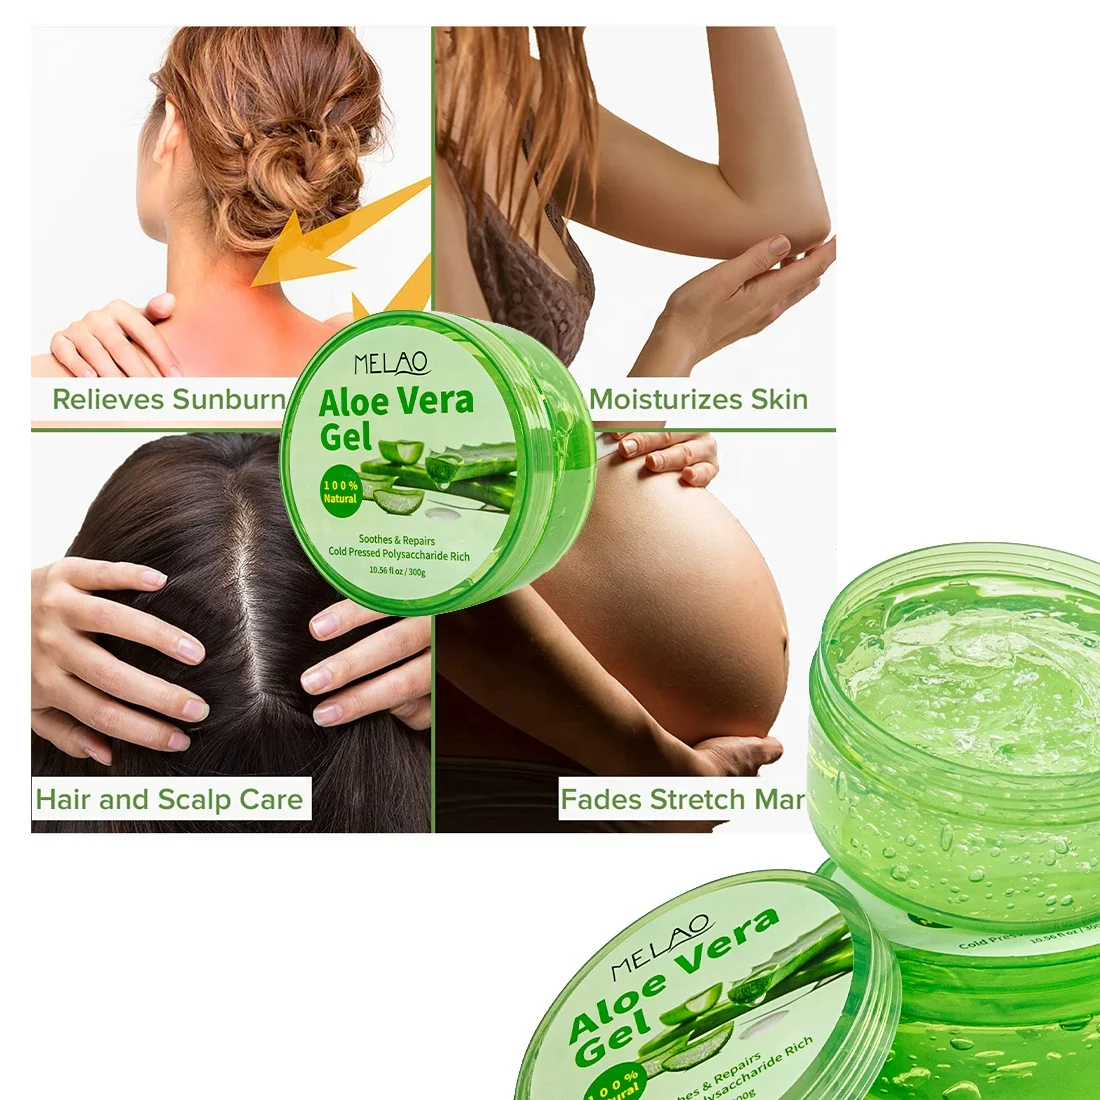 

Top quality melao after sun 100% pure natural organic aloe vera gel bio for body skin whitening & soothing